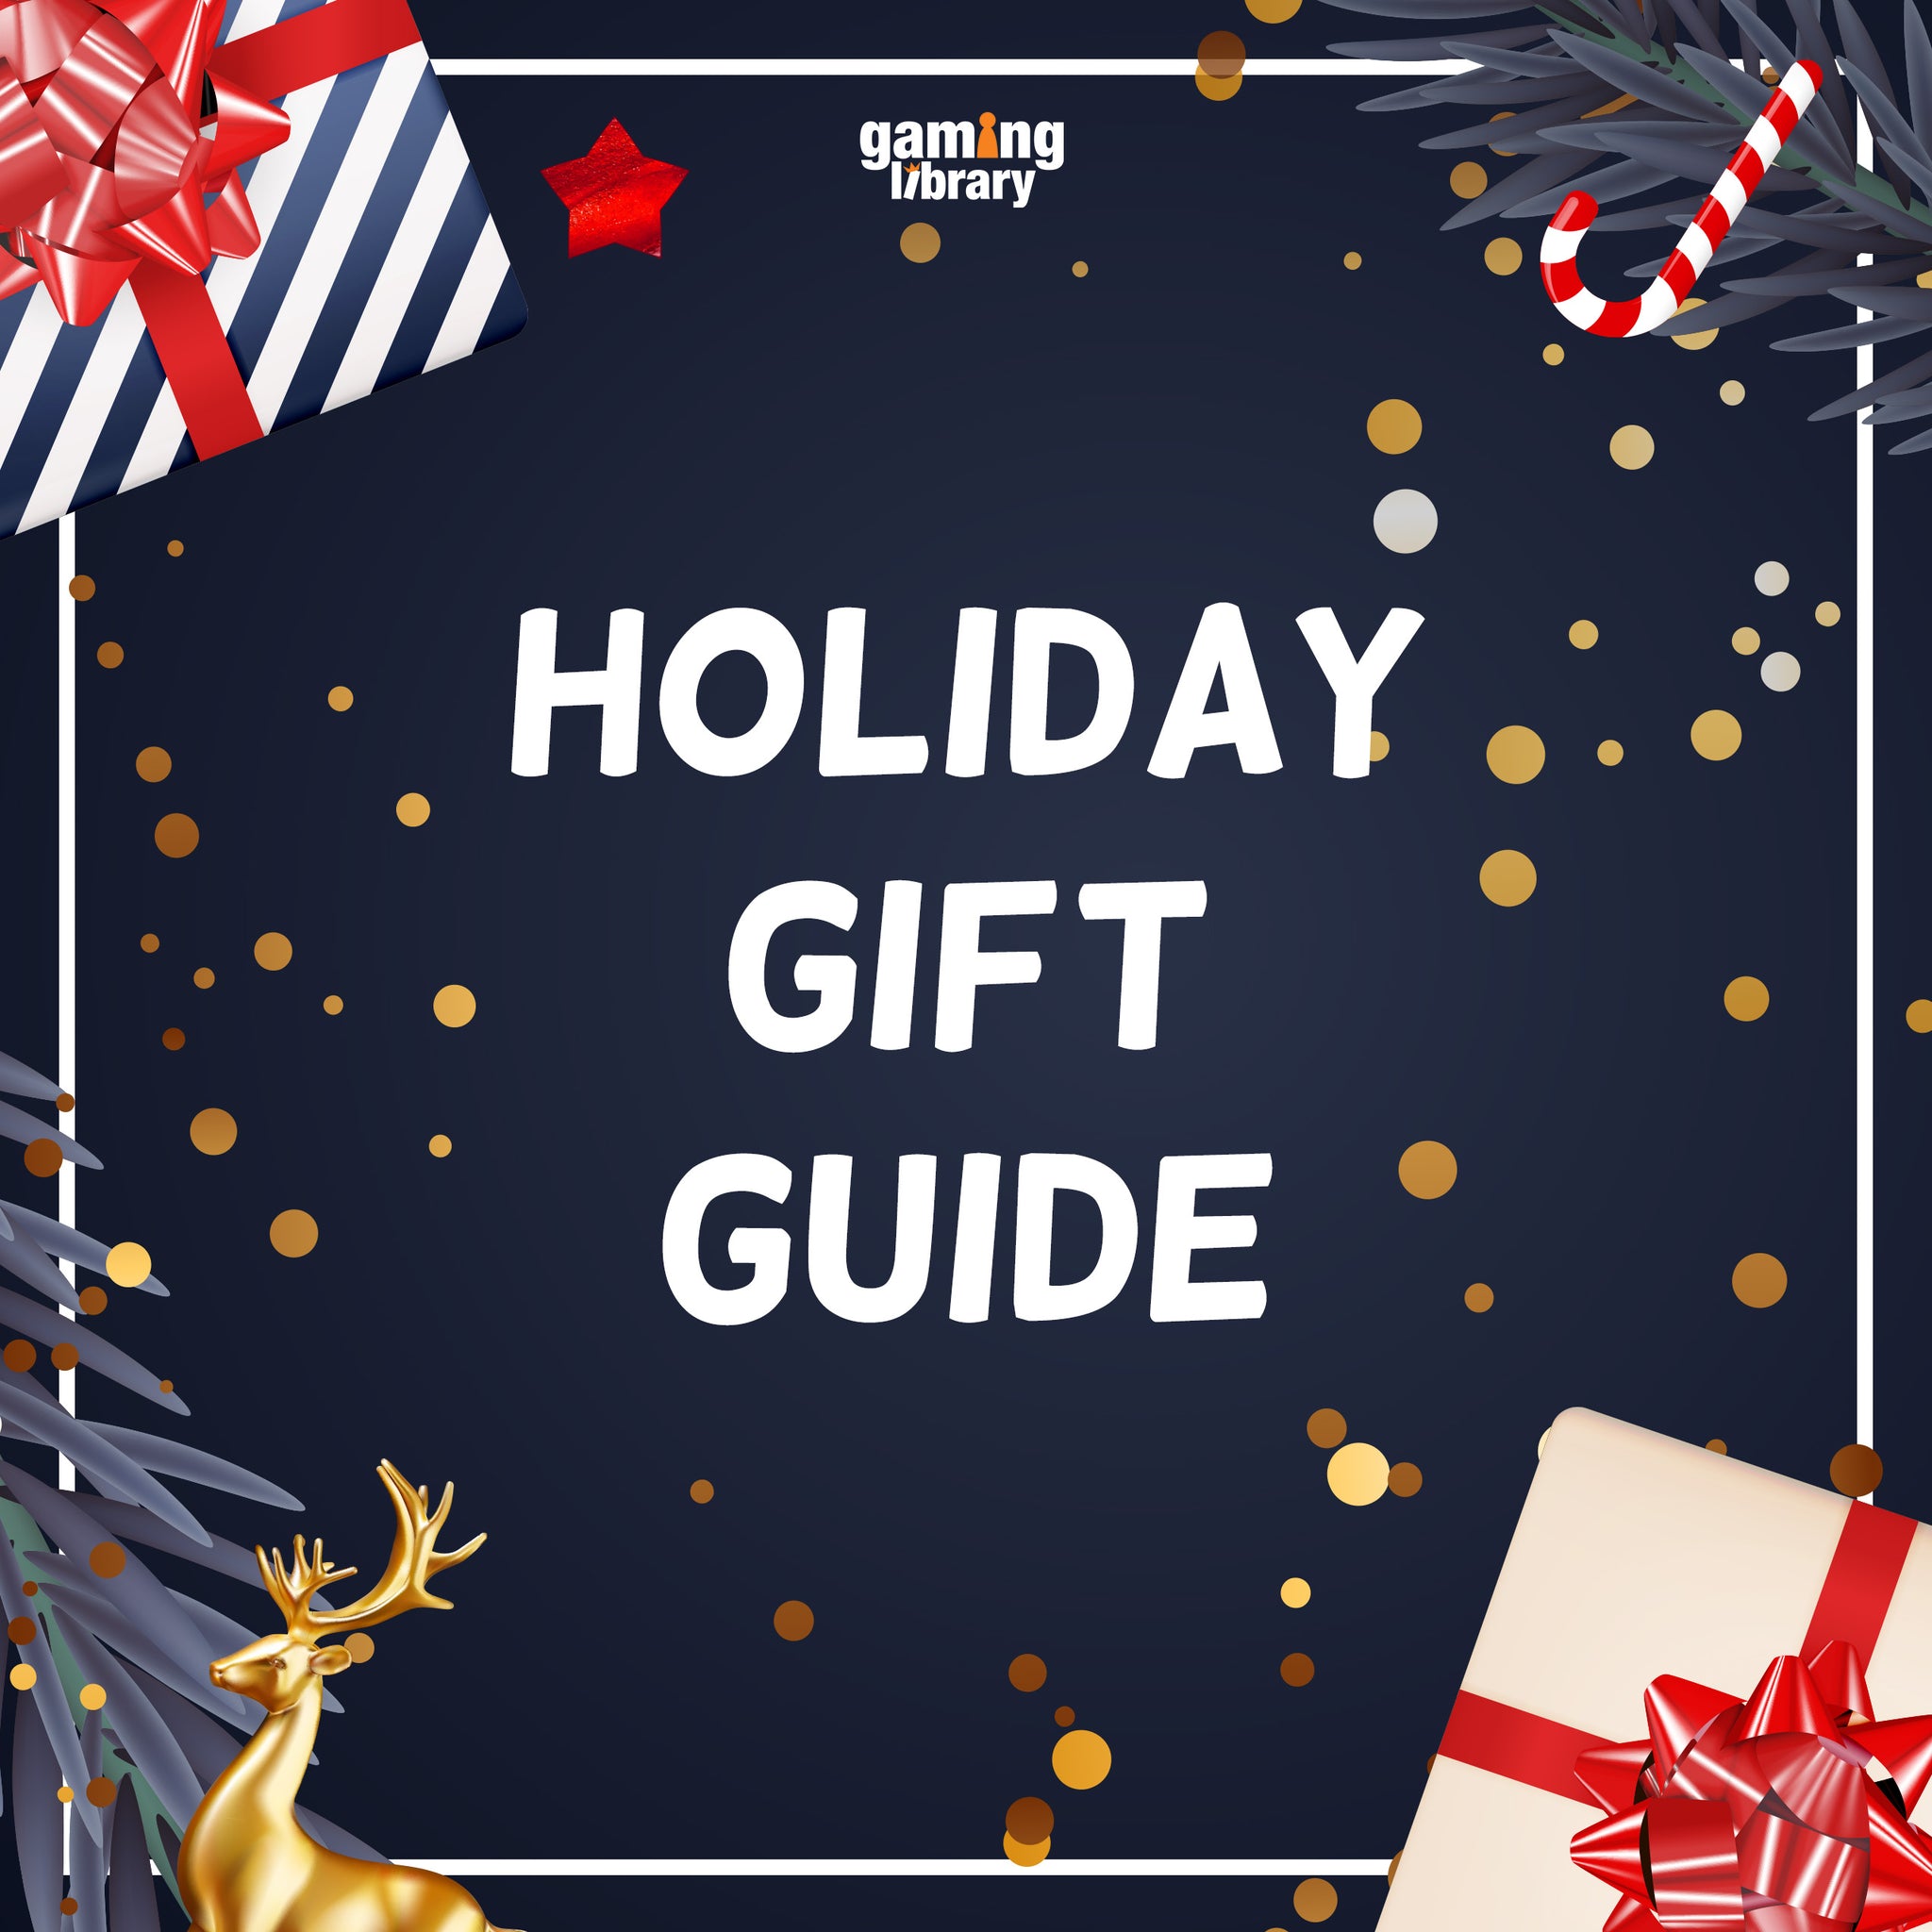 Holiday Gift Guide - Gaming Library